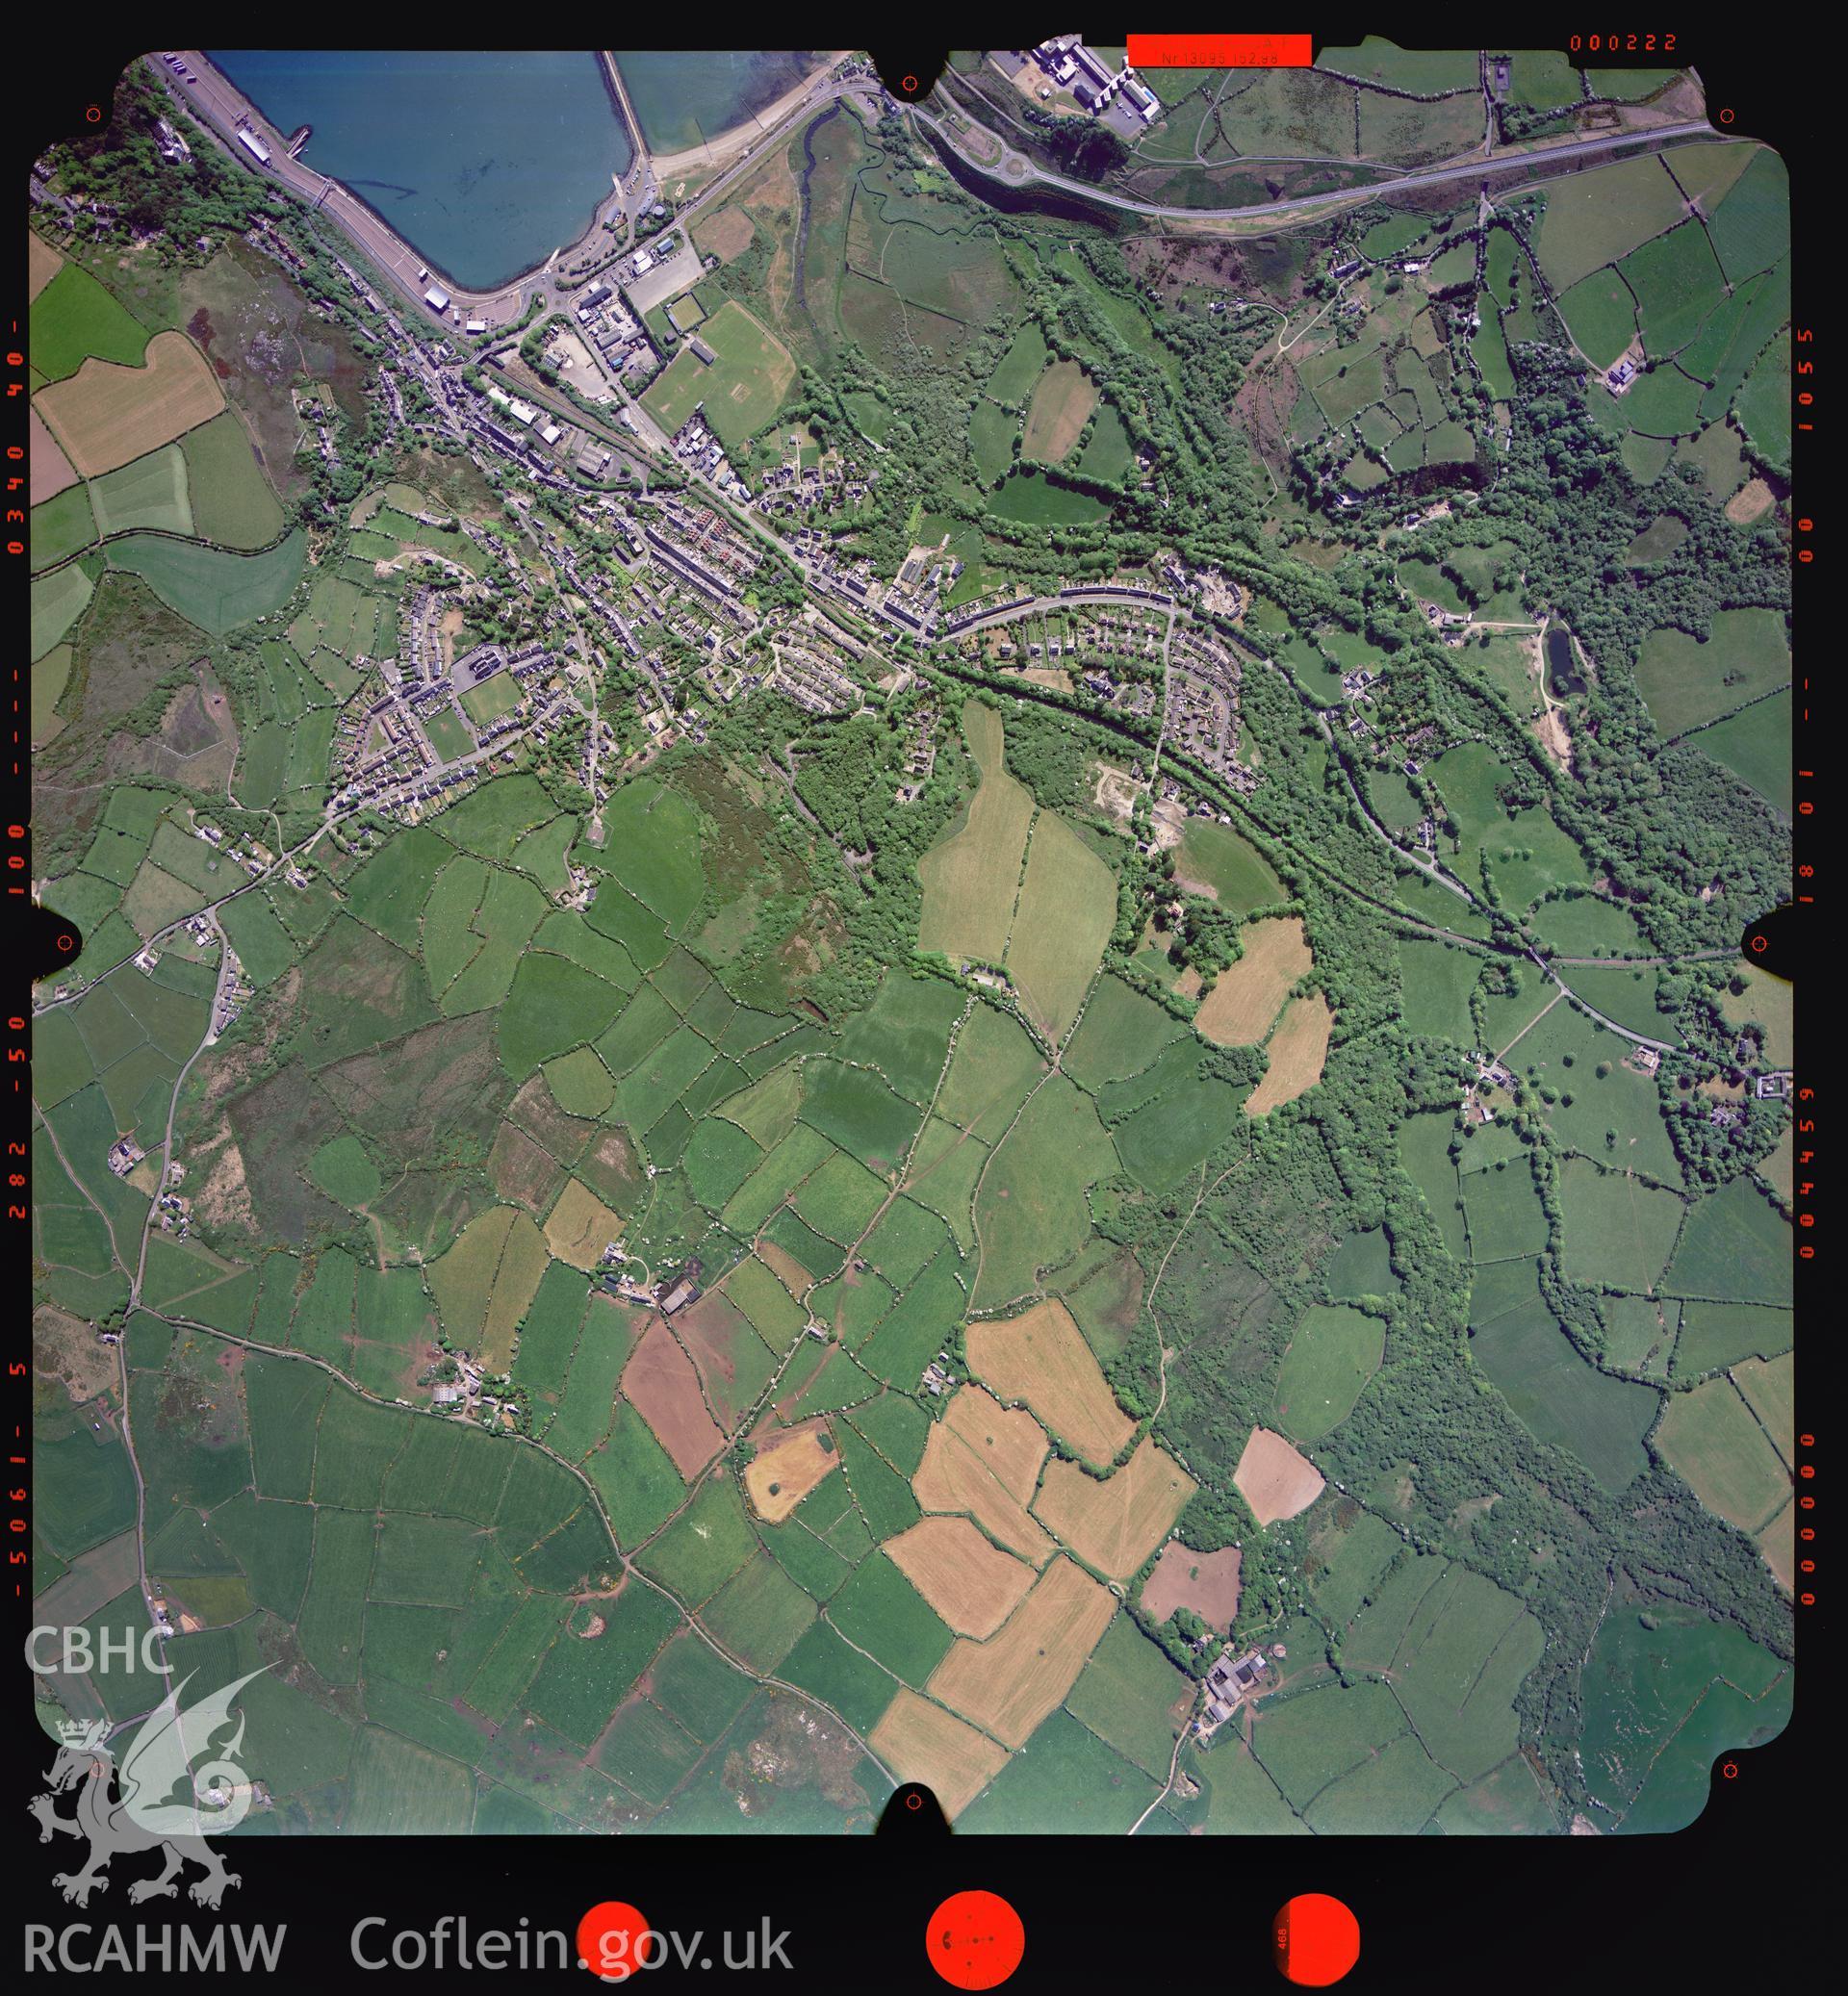 Digitized copy of a colour aerial photograph showing the Fishguard area, taken by Ordnance Survey, 2004.